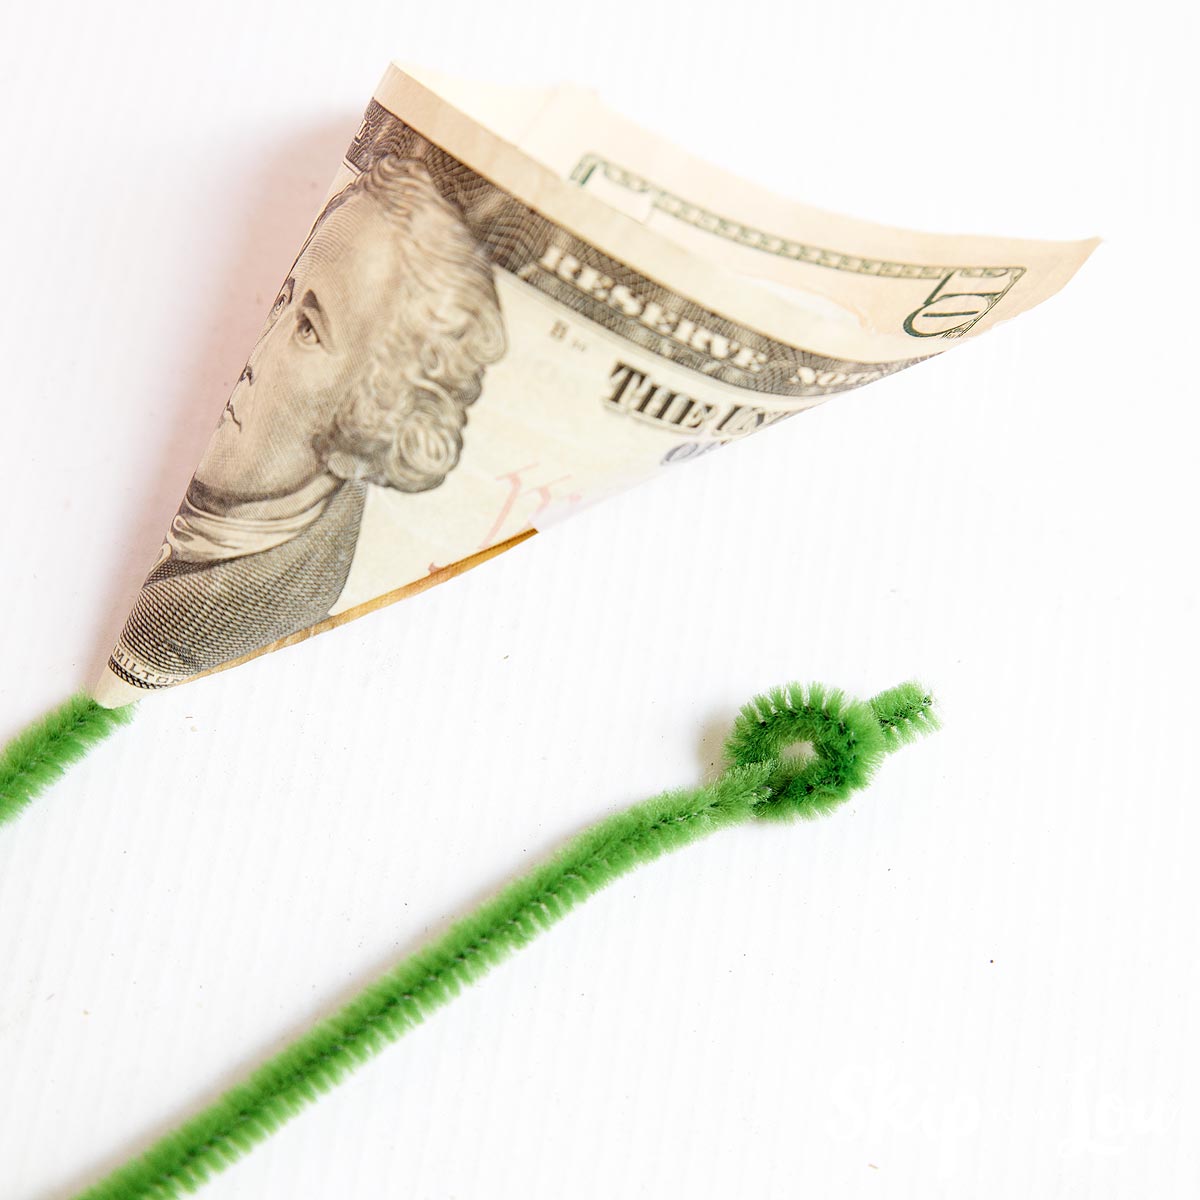 bill shaped into a cone placed on pipe cleaner to make money flower